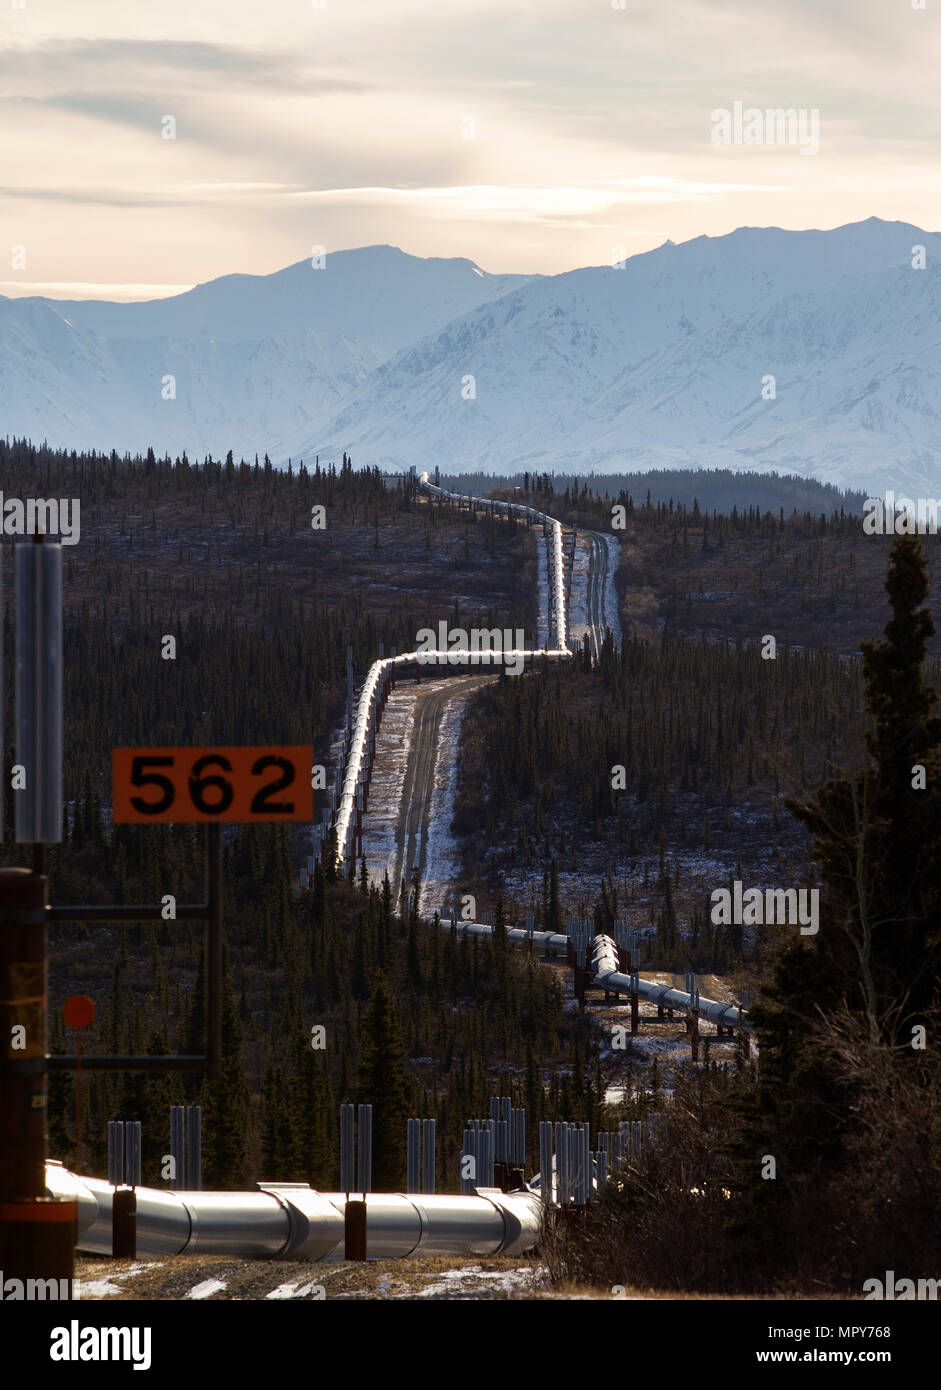 Trans-Alaskan Pipeline amidst forest against mountains during winter Stock Photo